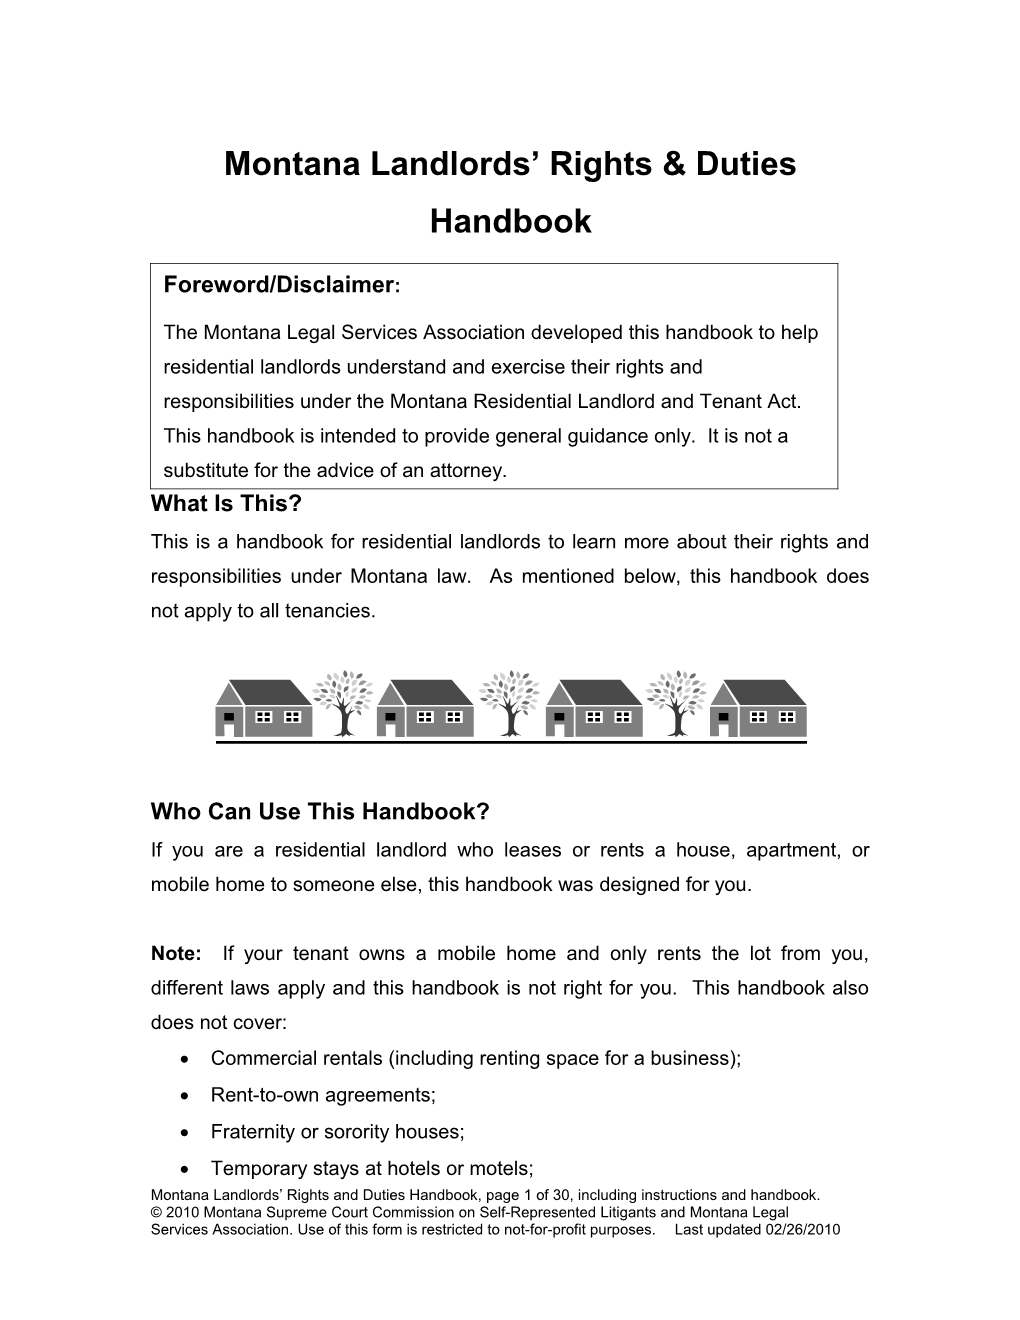 Landlords Rights Responsibilities